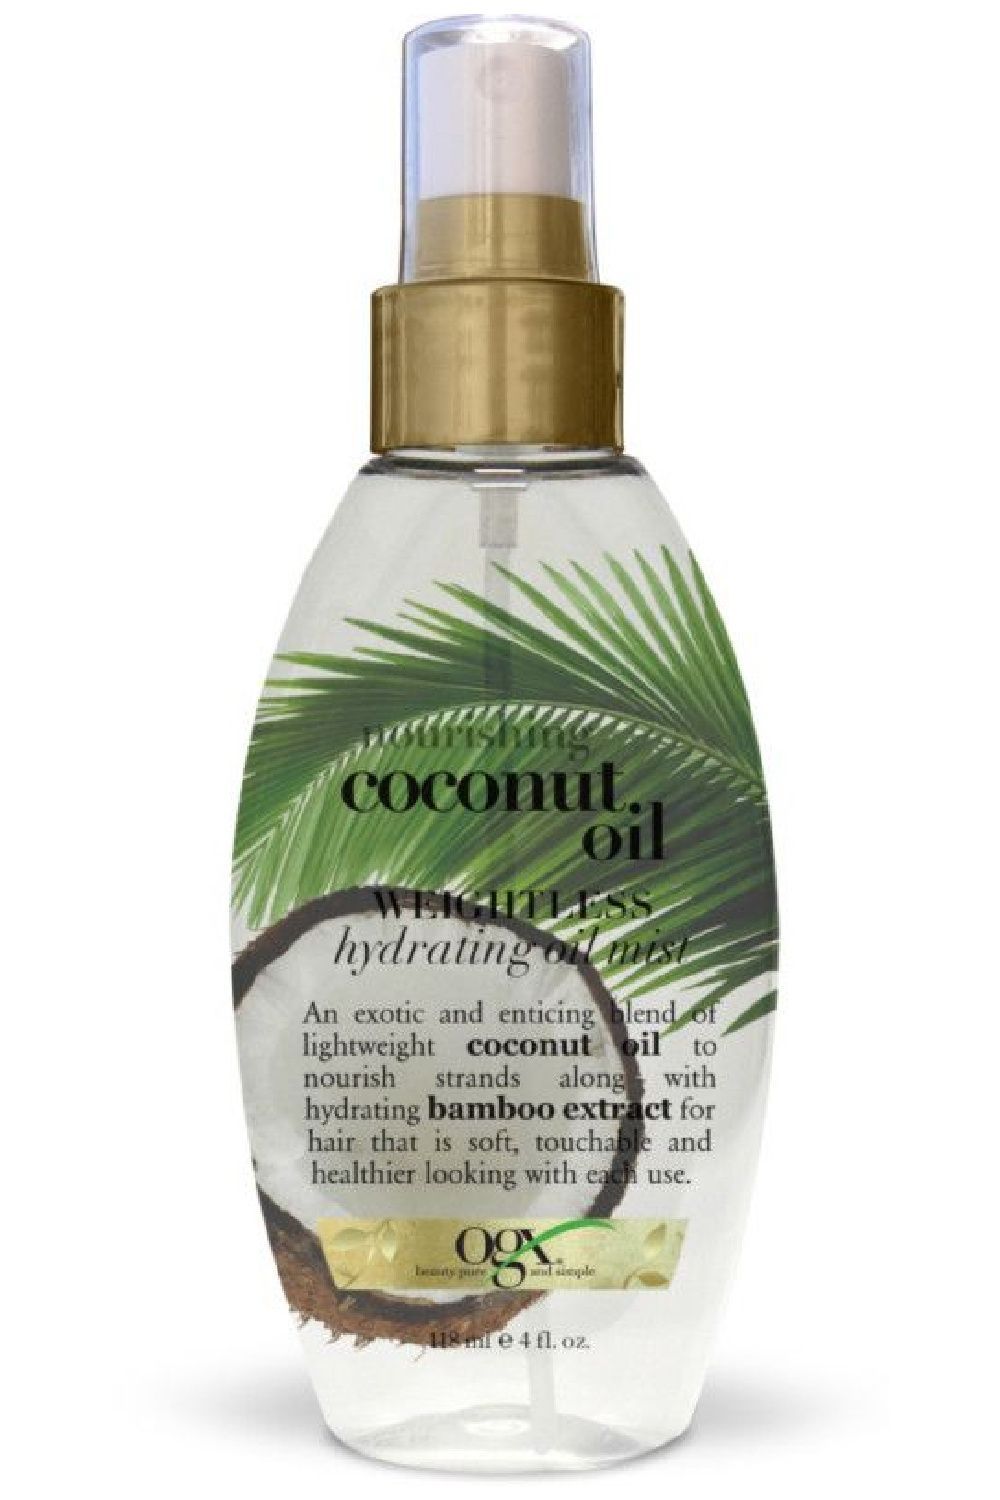 6 Best Coconut Oils for Skin  Hair  How to Buy Quality Coconut Oil